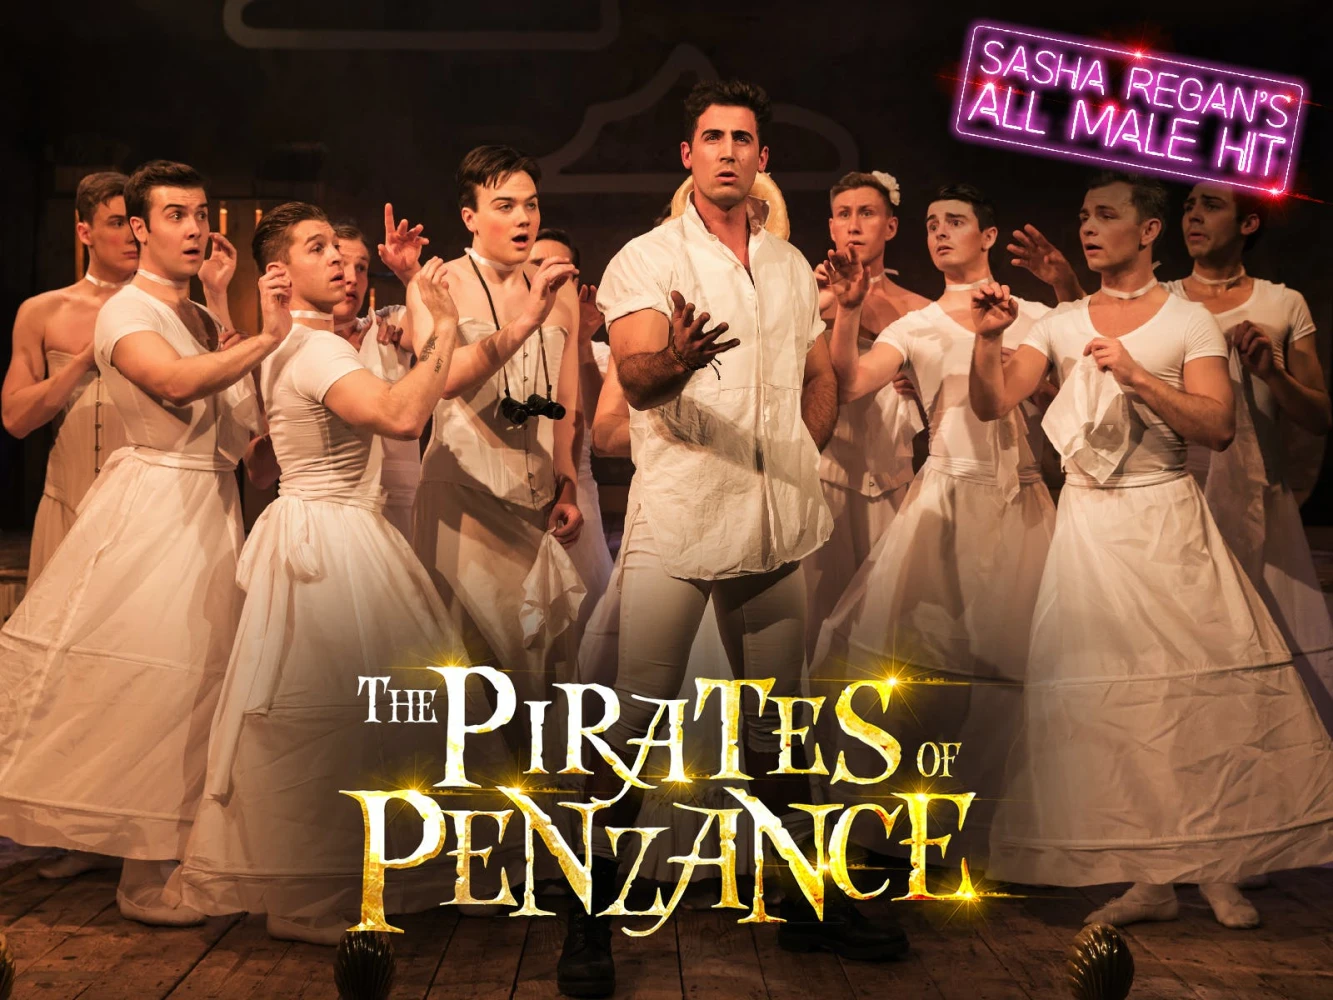 The Pirates of Penzance: What to expect - 4